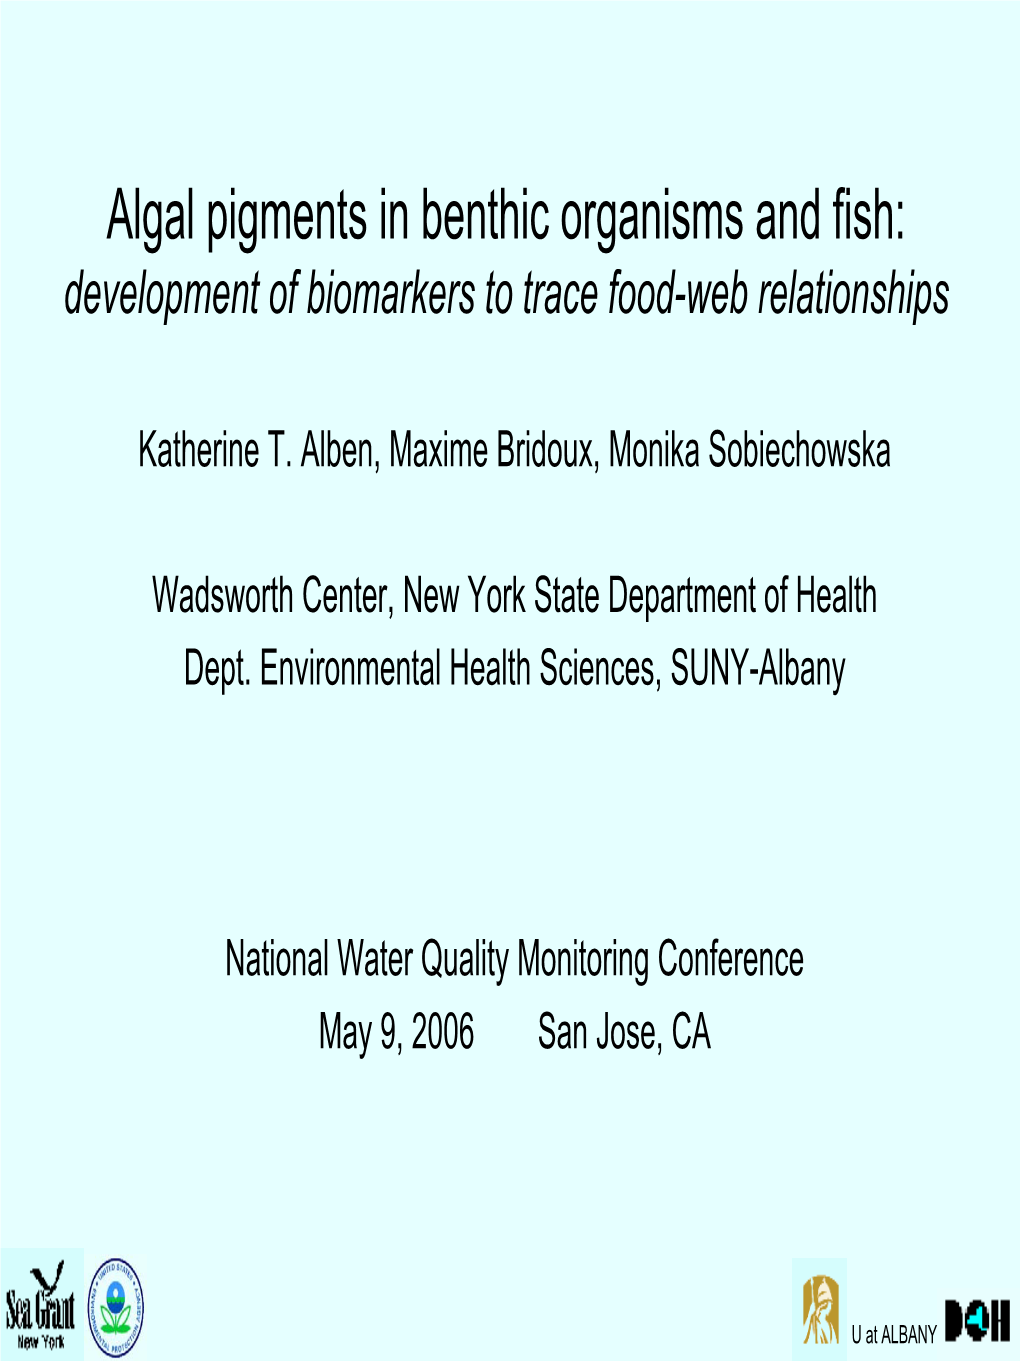 Algal Pigments As Biomarkers Linking Fish and Benthic Organisms with Type E Botulism